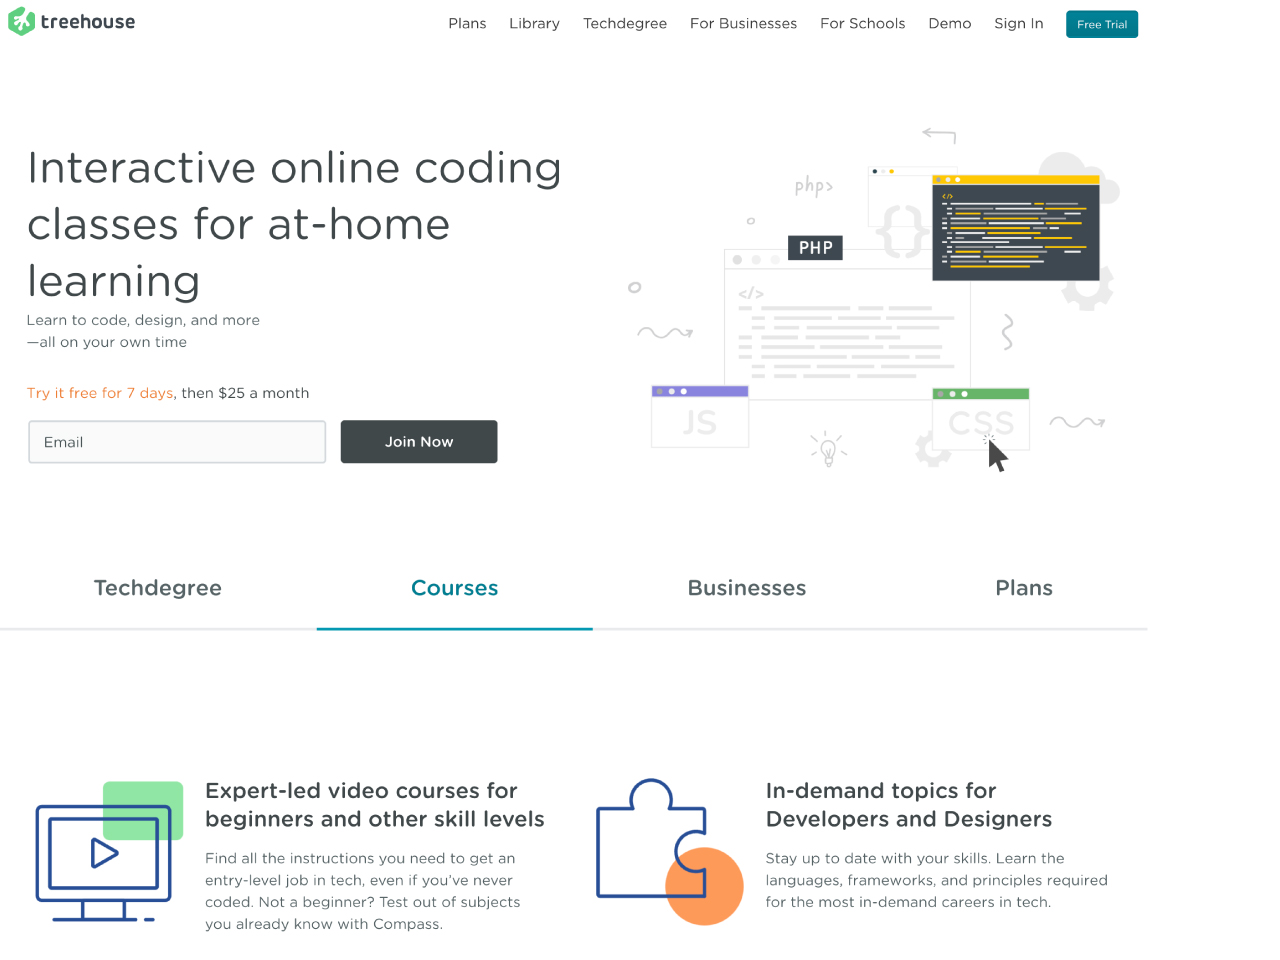 Interactive online coding classes for at-home learning